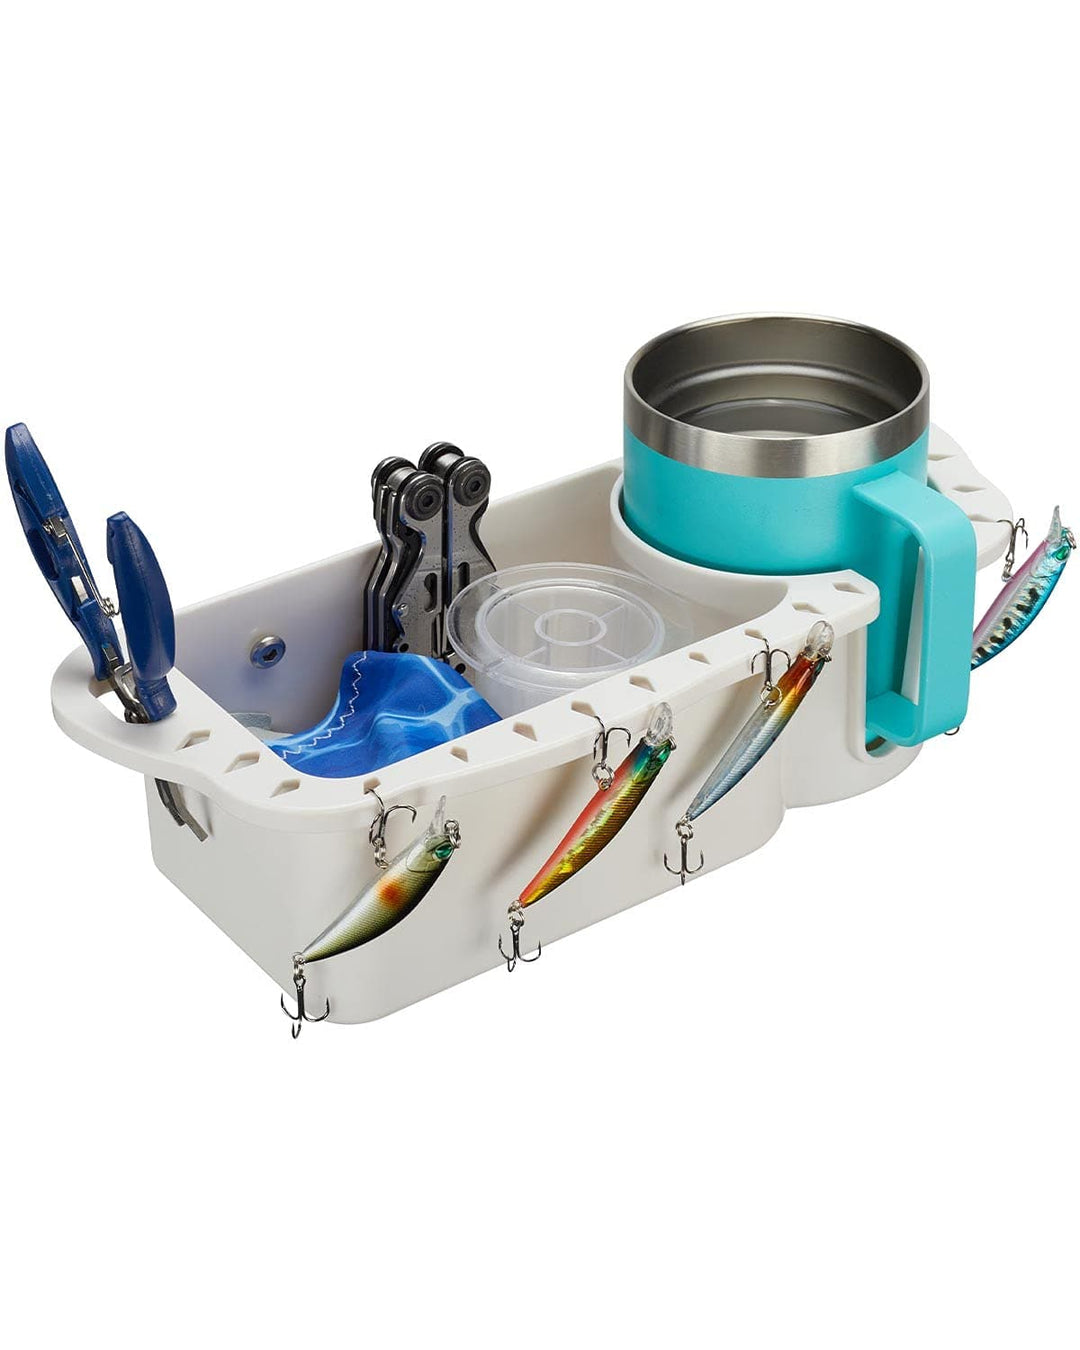 Boat Caddy Organizer Cup Holder - Kemimoto